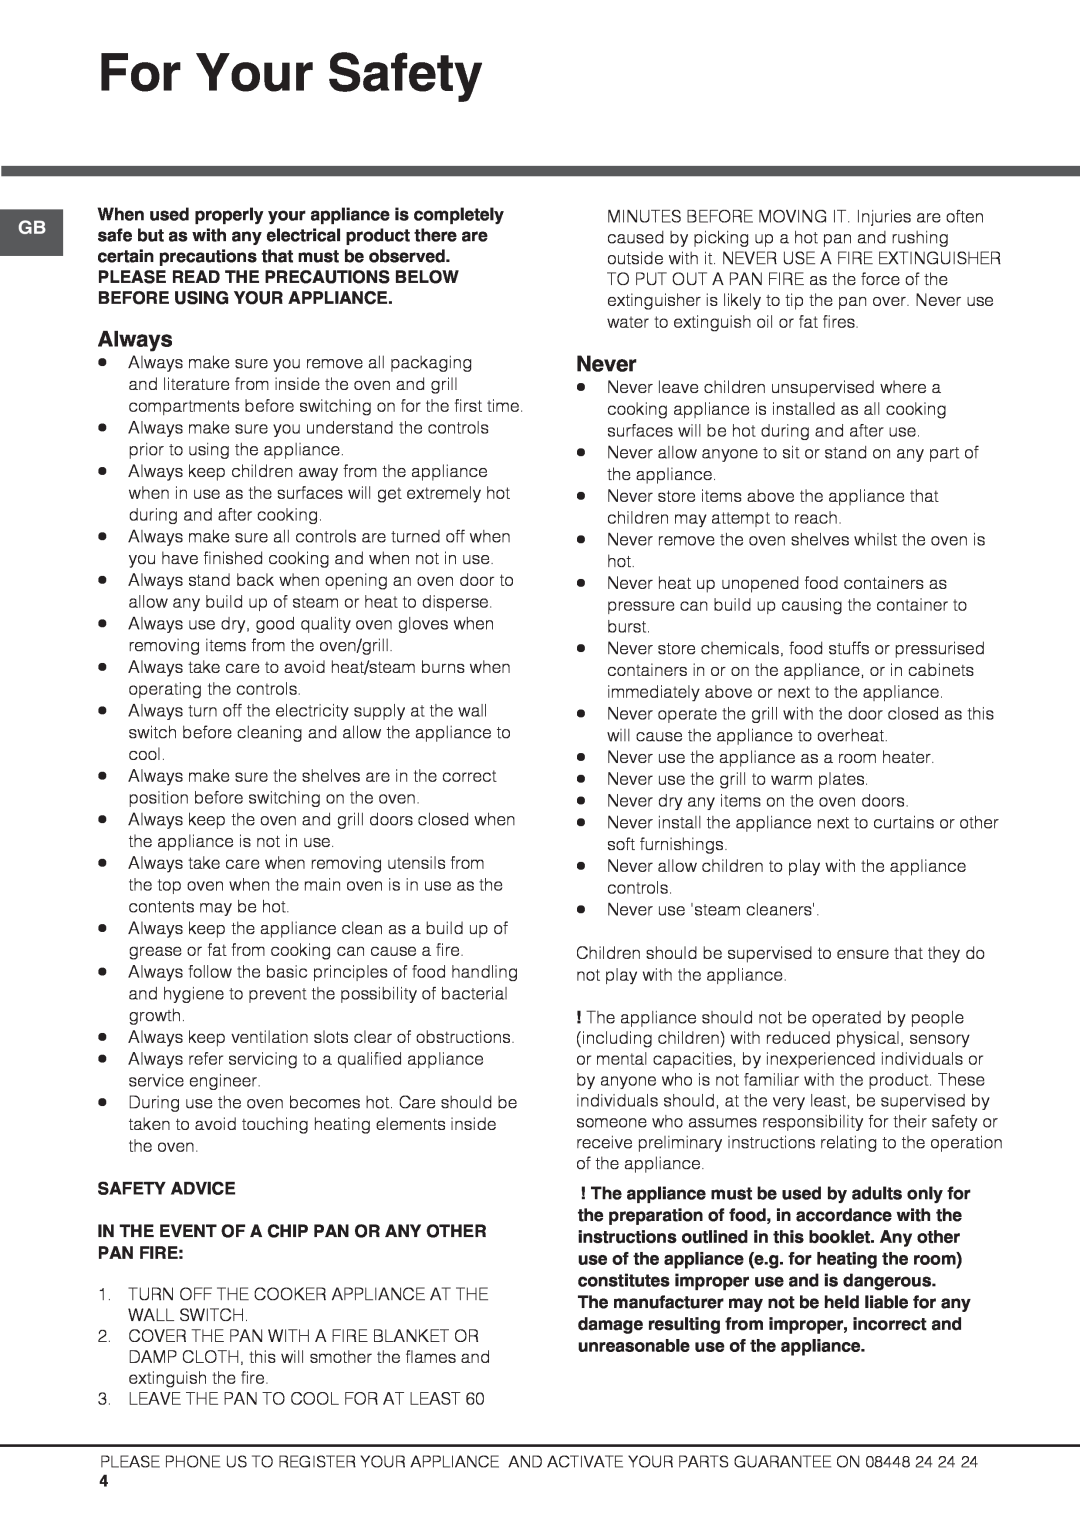 Hotpoint UBS 537 CX S manual For Your Safety, Always, Never, When used properly your appliance is completely, Safety Advice 